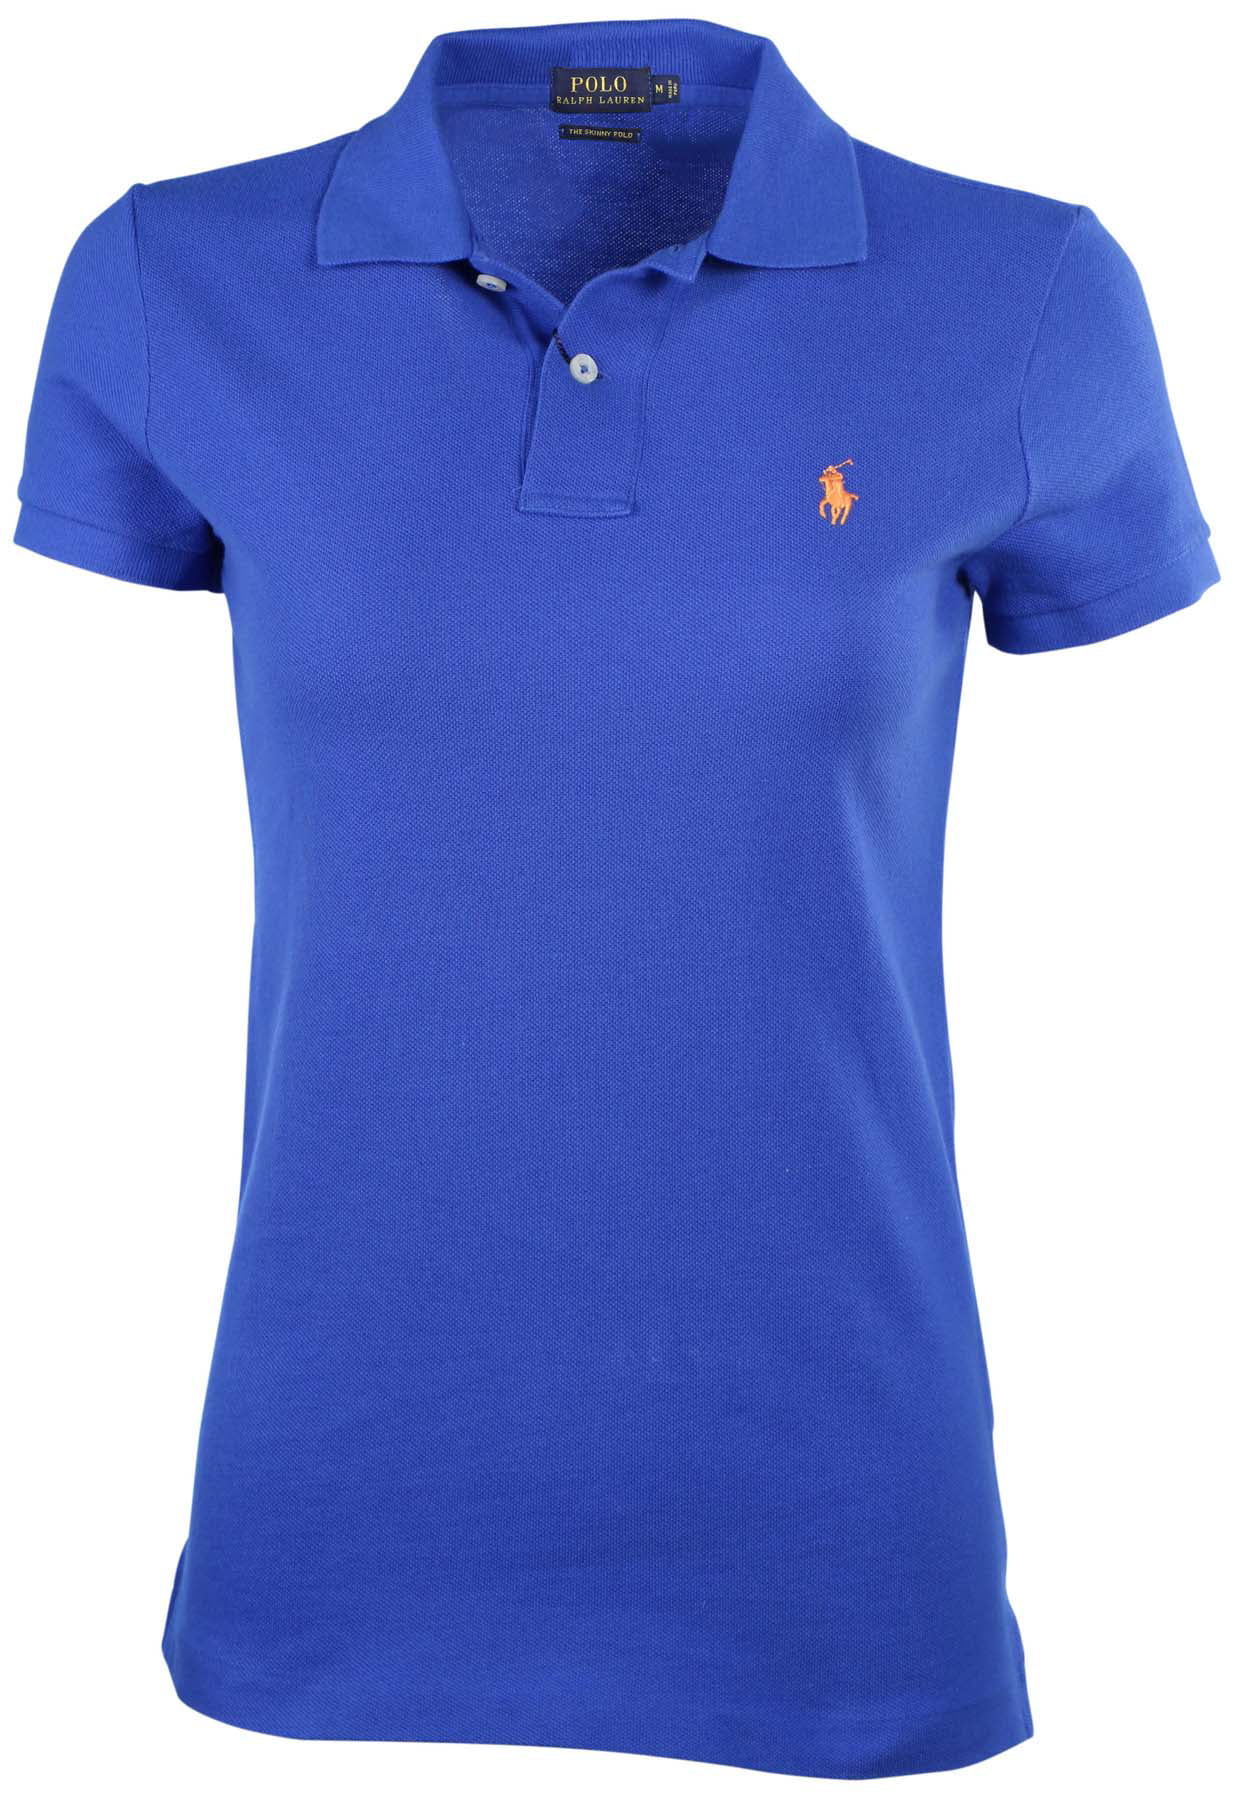 Polo Ralph Lauren Women's Mesh The Skinny Polo Shirt-Bright Imperial ...